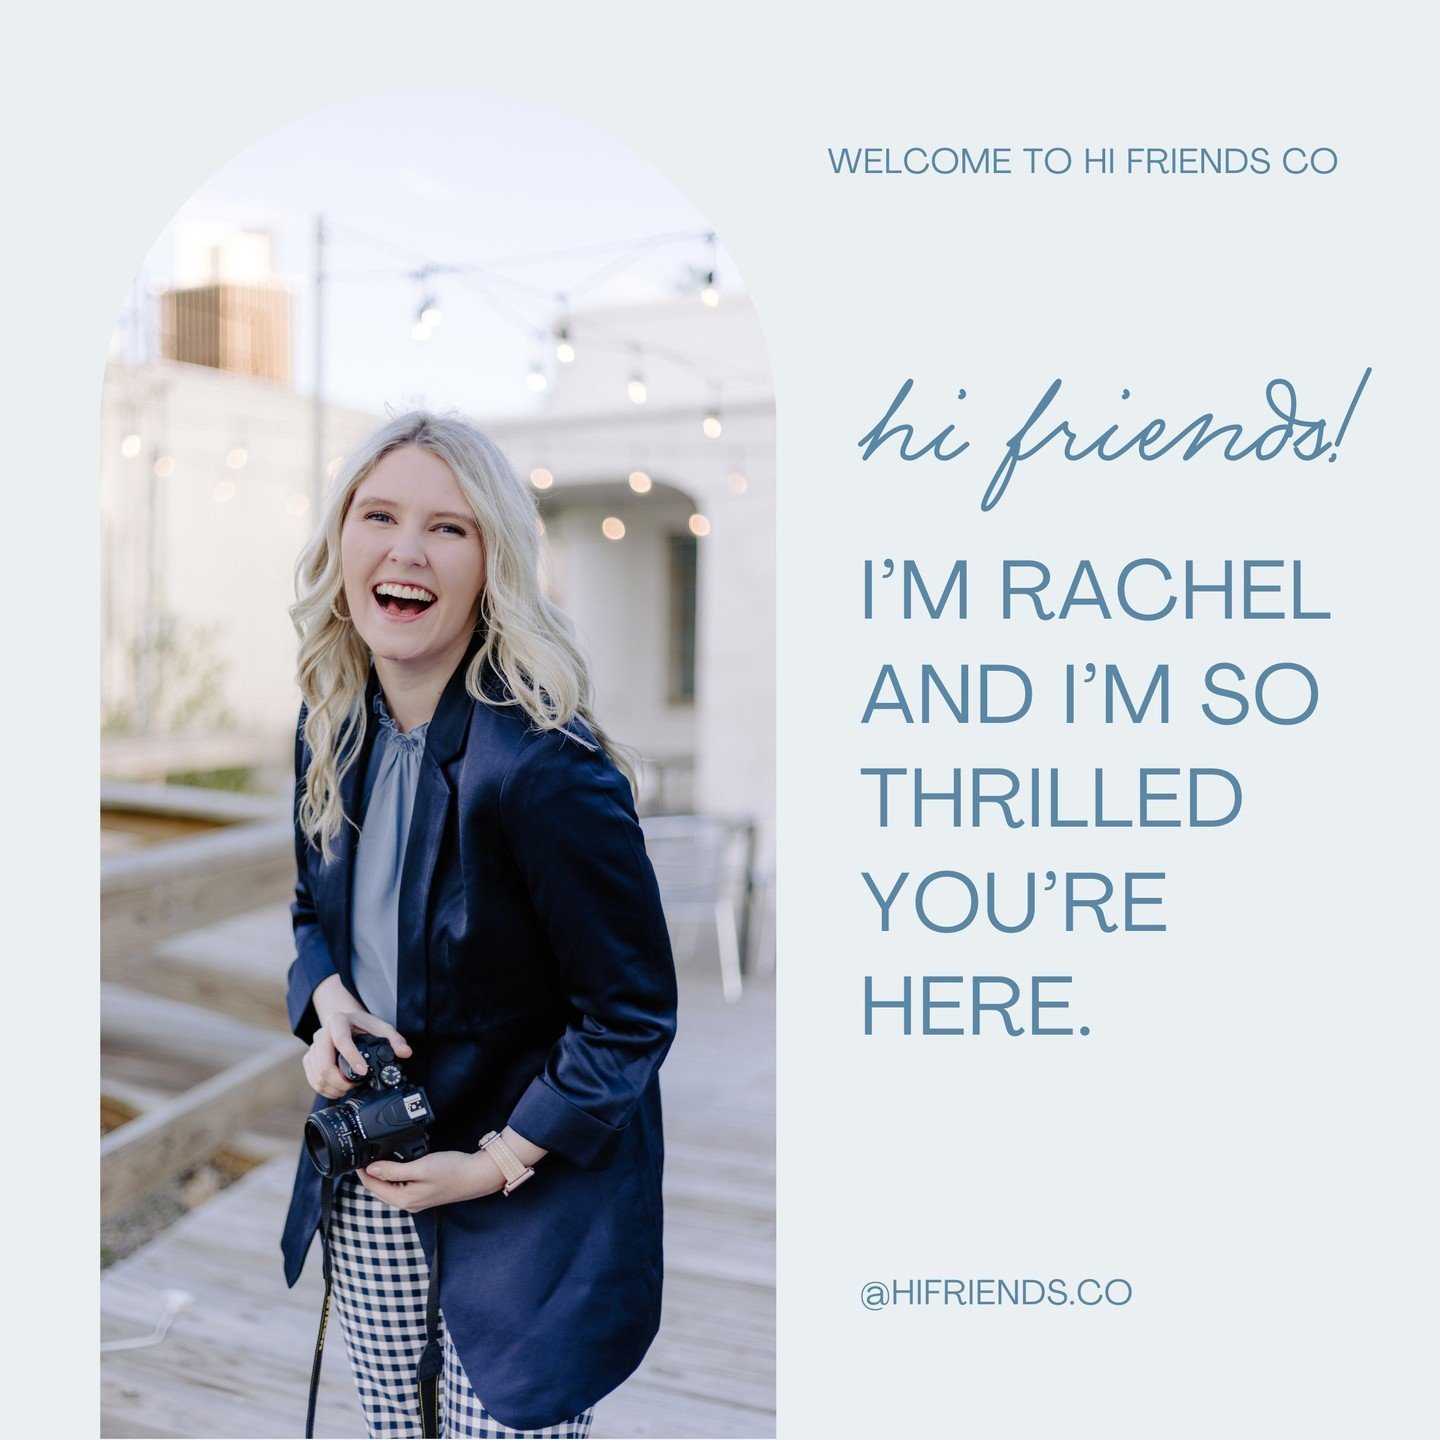 We've got so many new faces around here, so I'm here to say hi, hello, &amp; welcome to Hi Friends Co! ⁠
⁠
I love cultivating a senior photos experience that prioritizes joy, values fun, &amp; fosters encouragement - leaving you with beautiful, authe